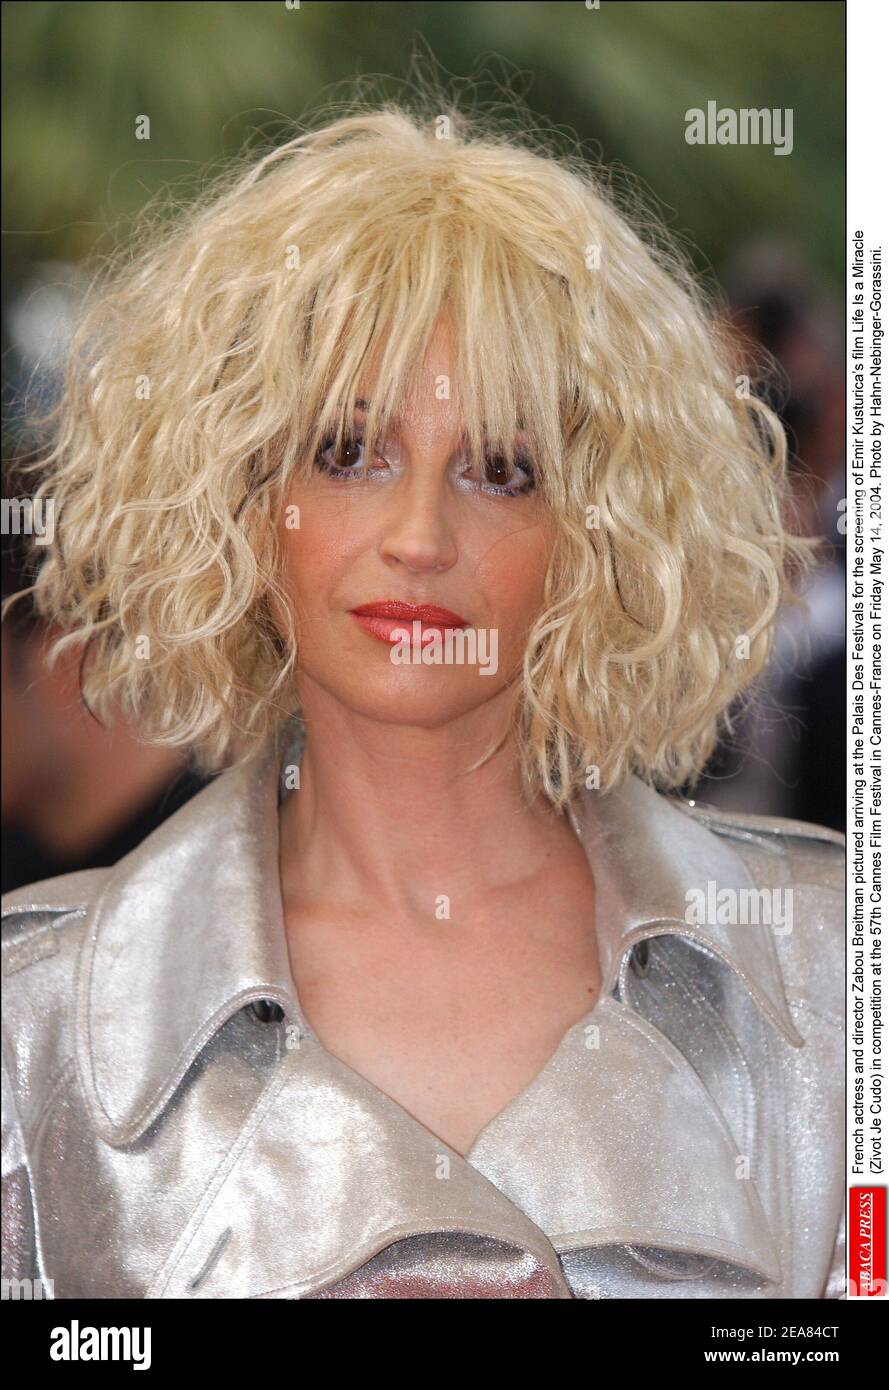 French actress and director Zabou Breitman pictured arriving at the Palais Des Festivals for the screening of Emir Kusturica's film Life Is a Miracle (Zivot Je Cudo) in competition at the 57th Cannes Film Festival in Cannes-France on Friday May 14, 2004. Photo by Hahn-Nebinger-Gorassini. Stock Photo